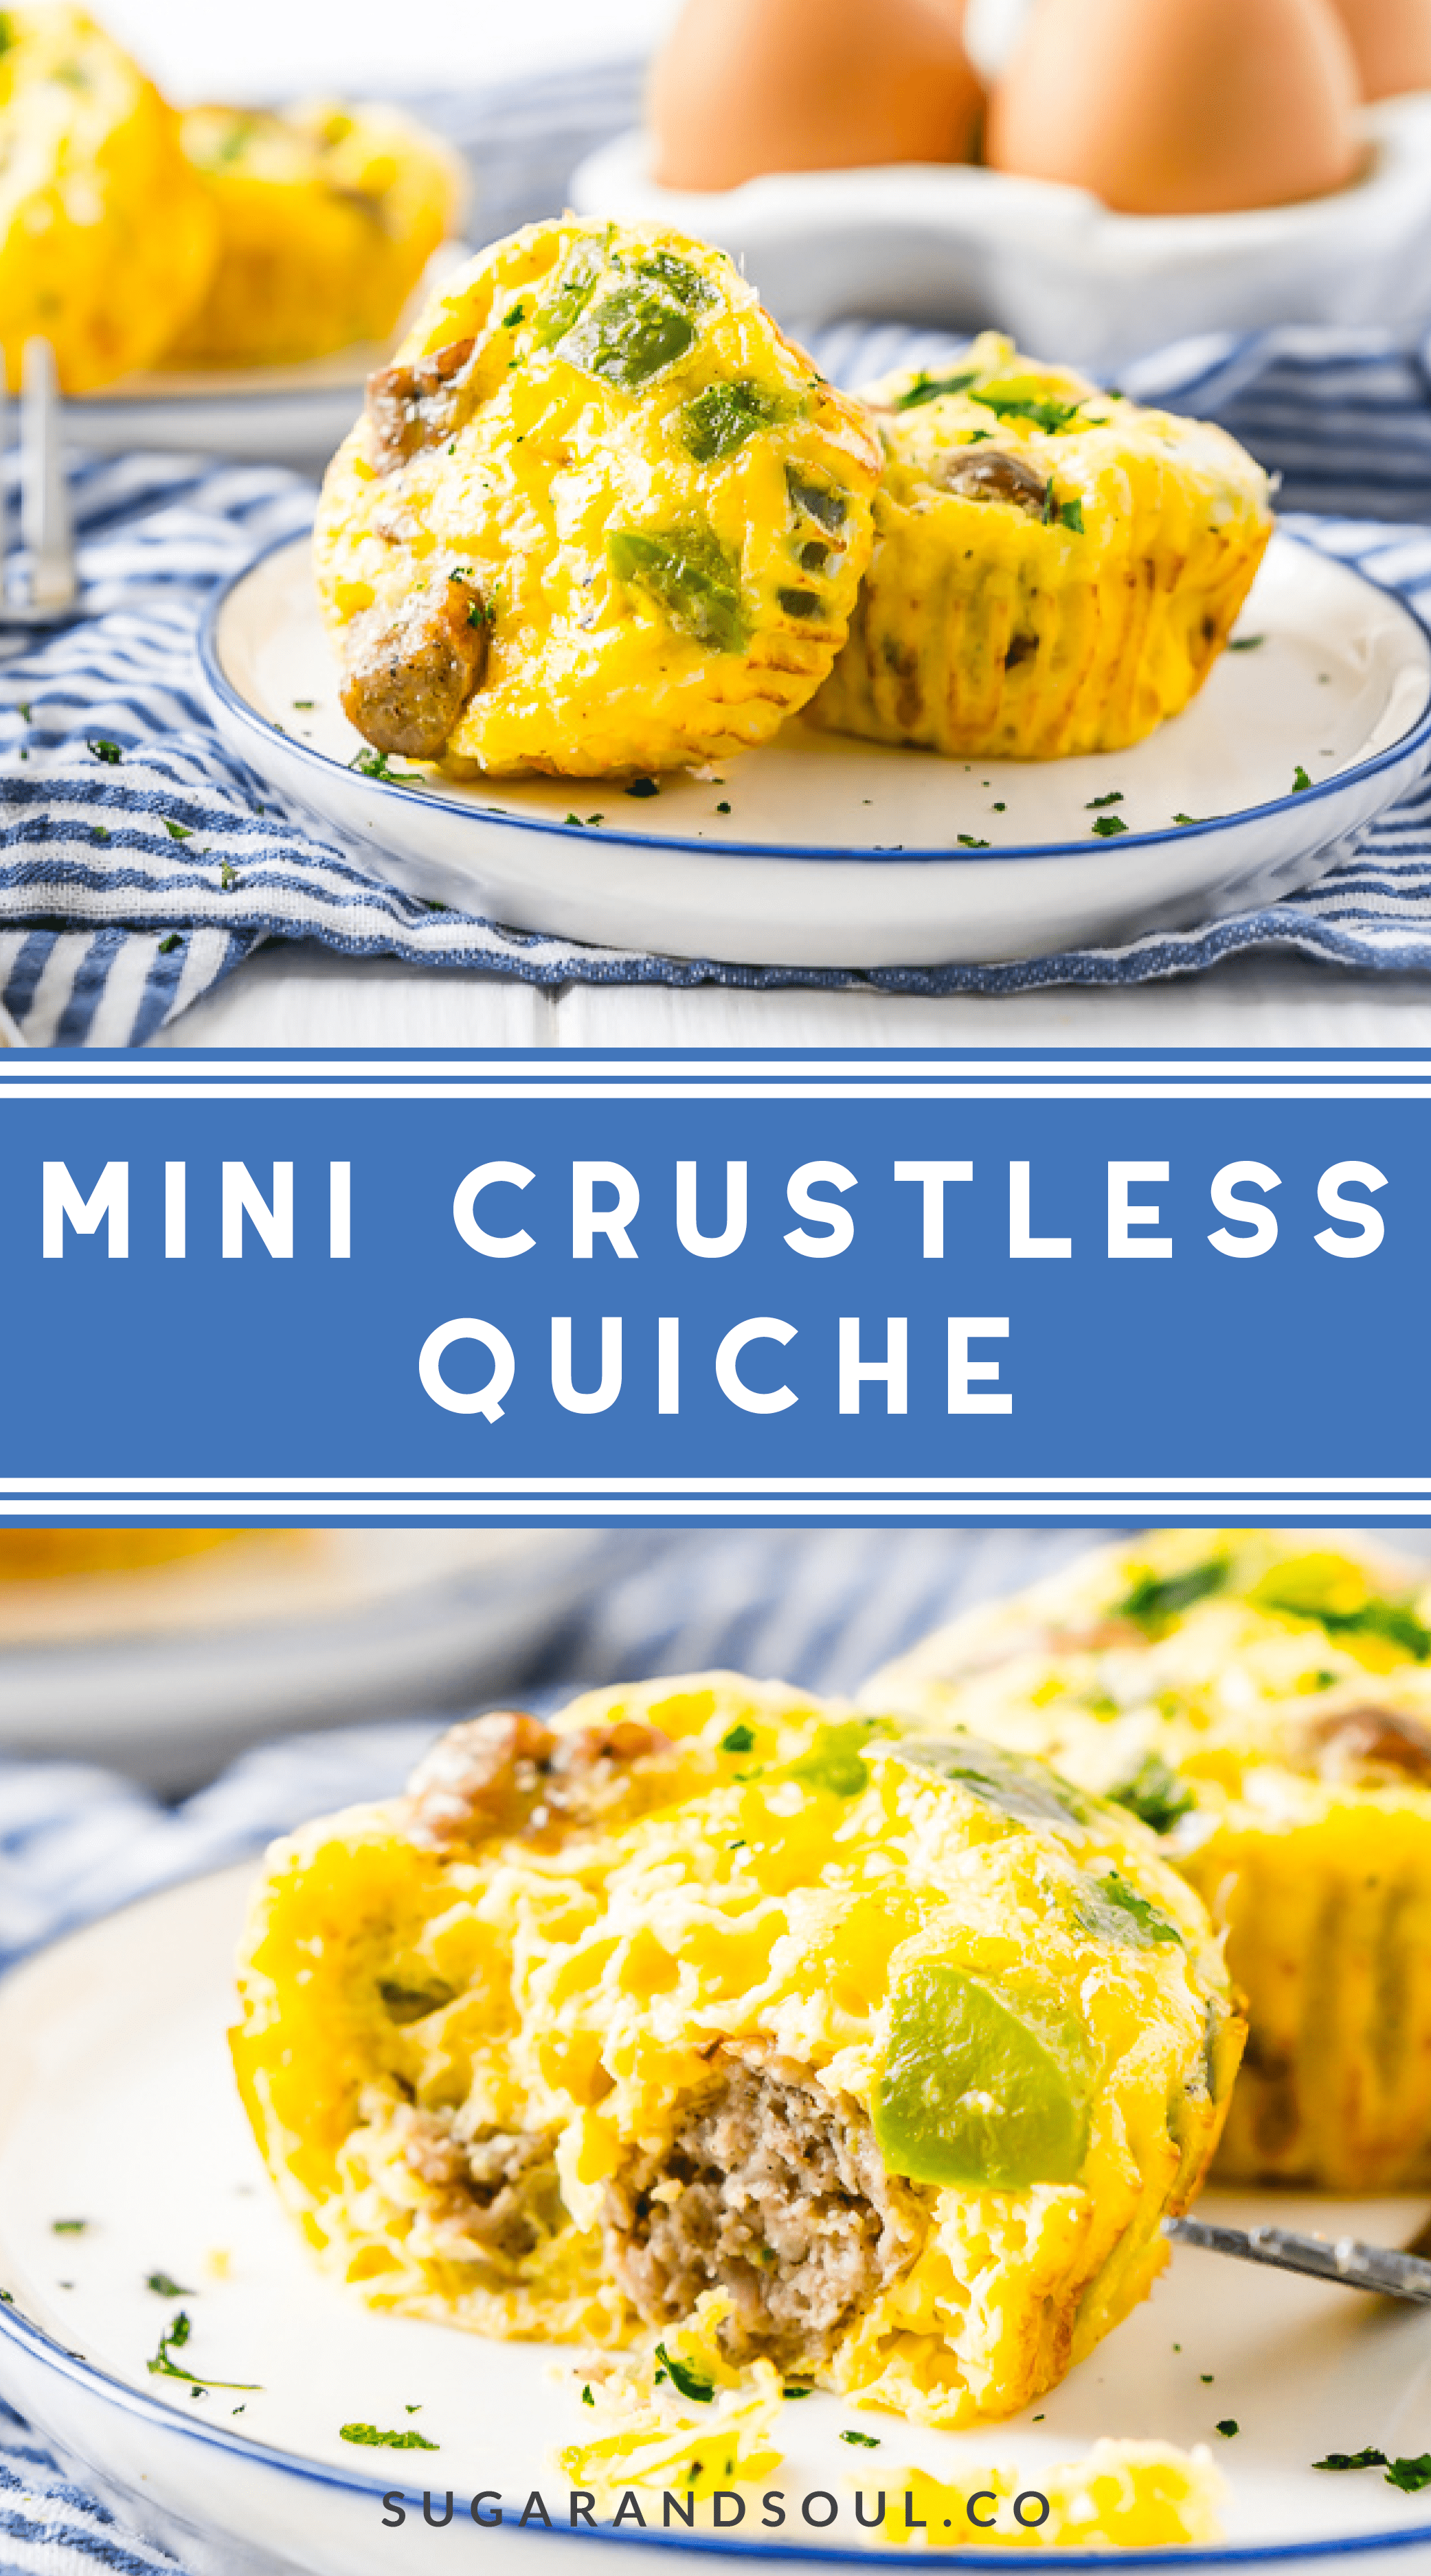 This Crustless Mini Quiche Recipe made with eggs, sausage, green peppers, and cheese are perfect for quick weekday breakfasts or weekend brunch! Make them ahead of time and freeze them for when you want them! via @sugarandsoulco